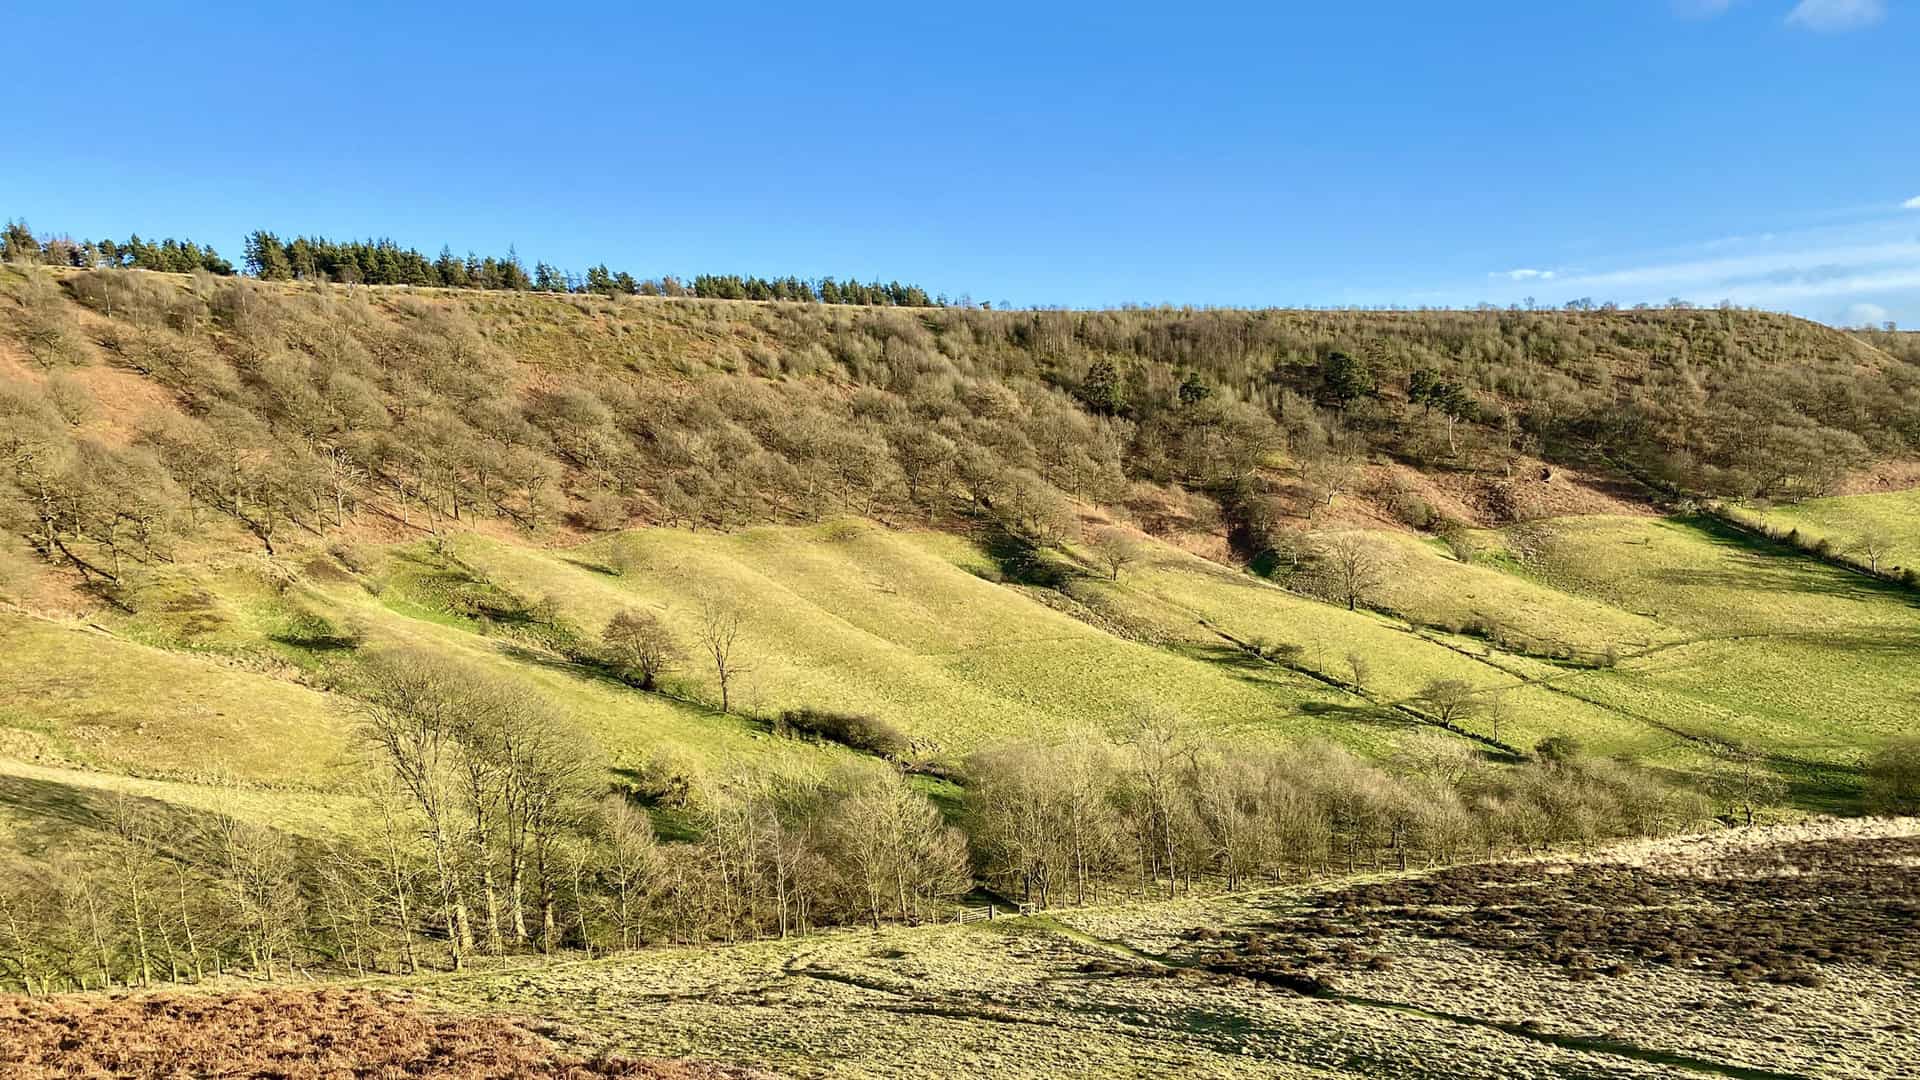 The Hole of Horcum. From number 10 in my list of the best walks in the North York Moors.